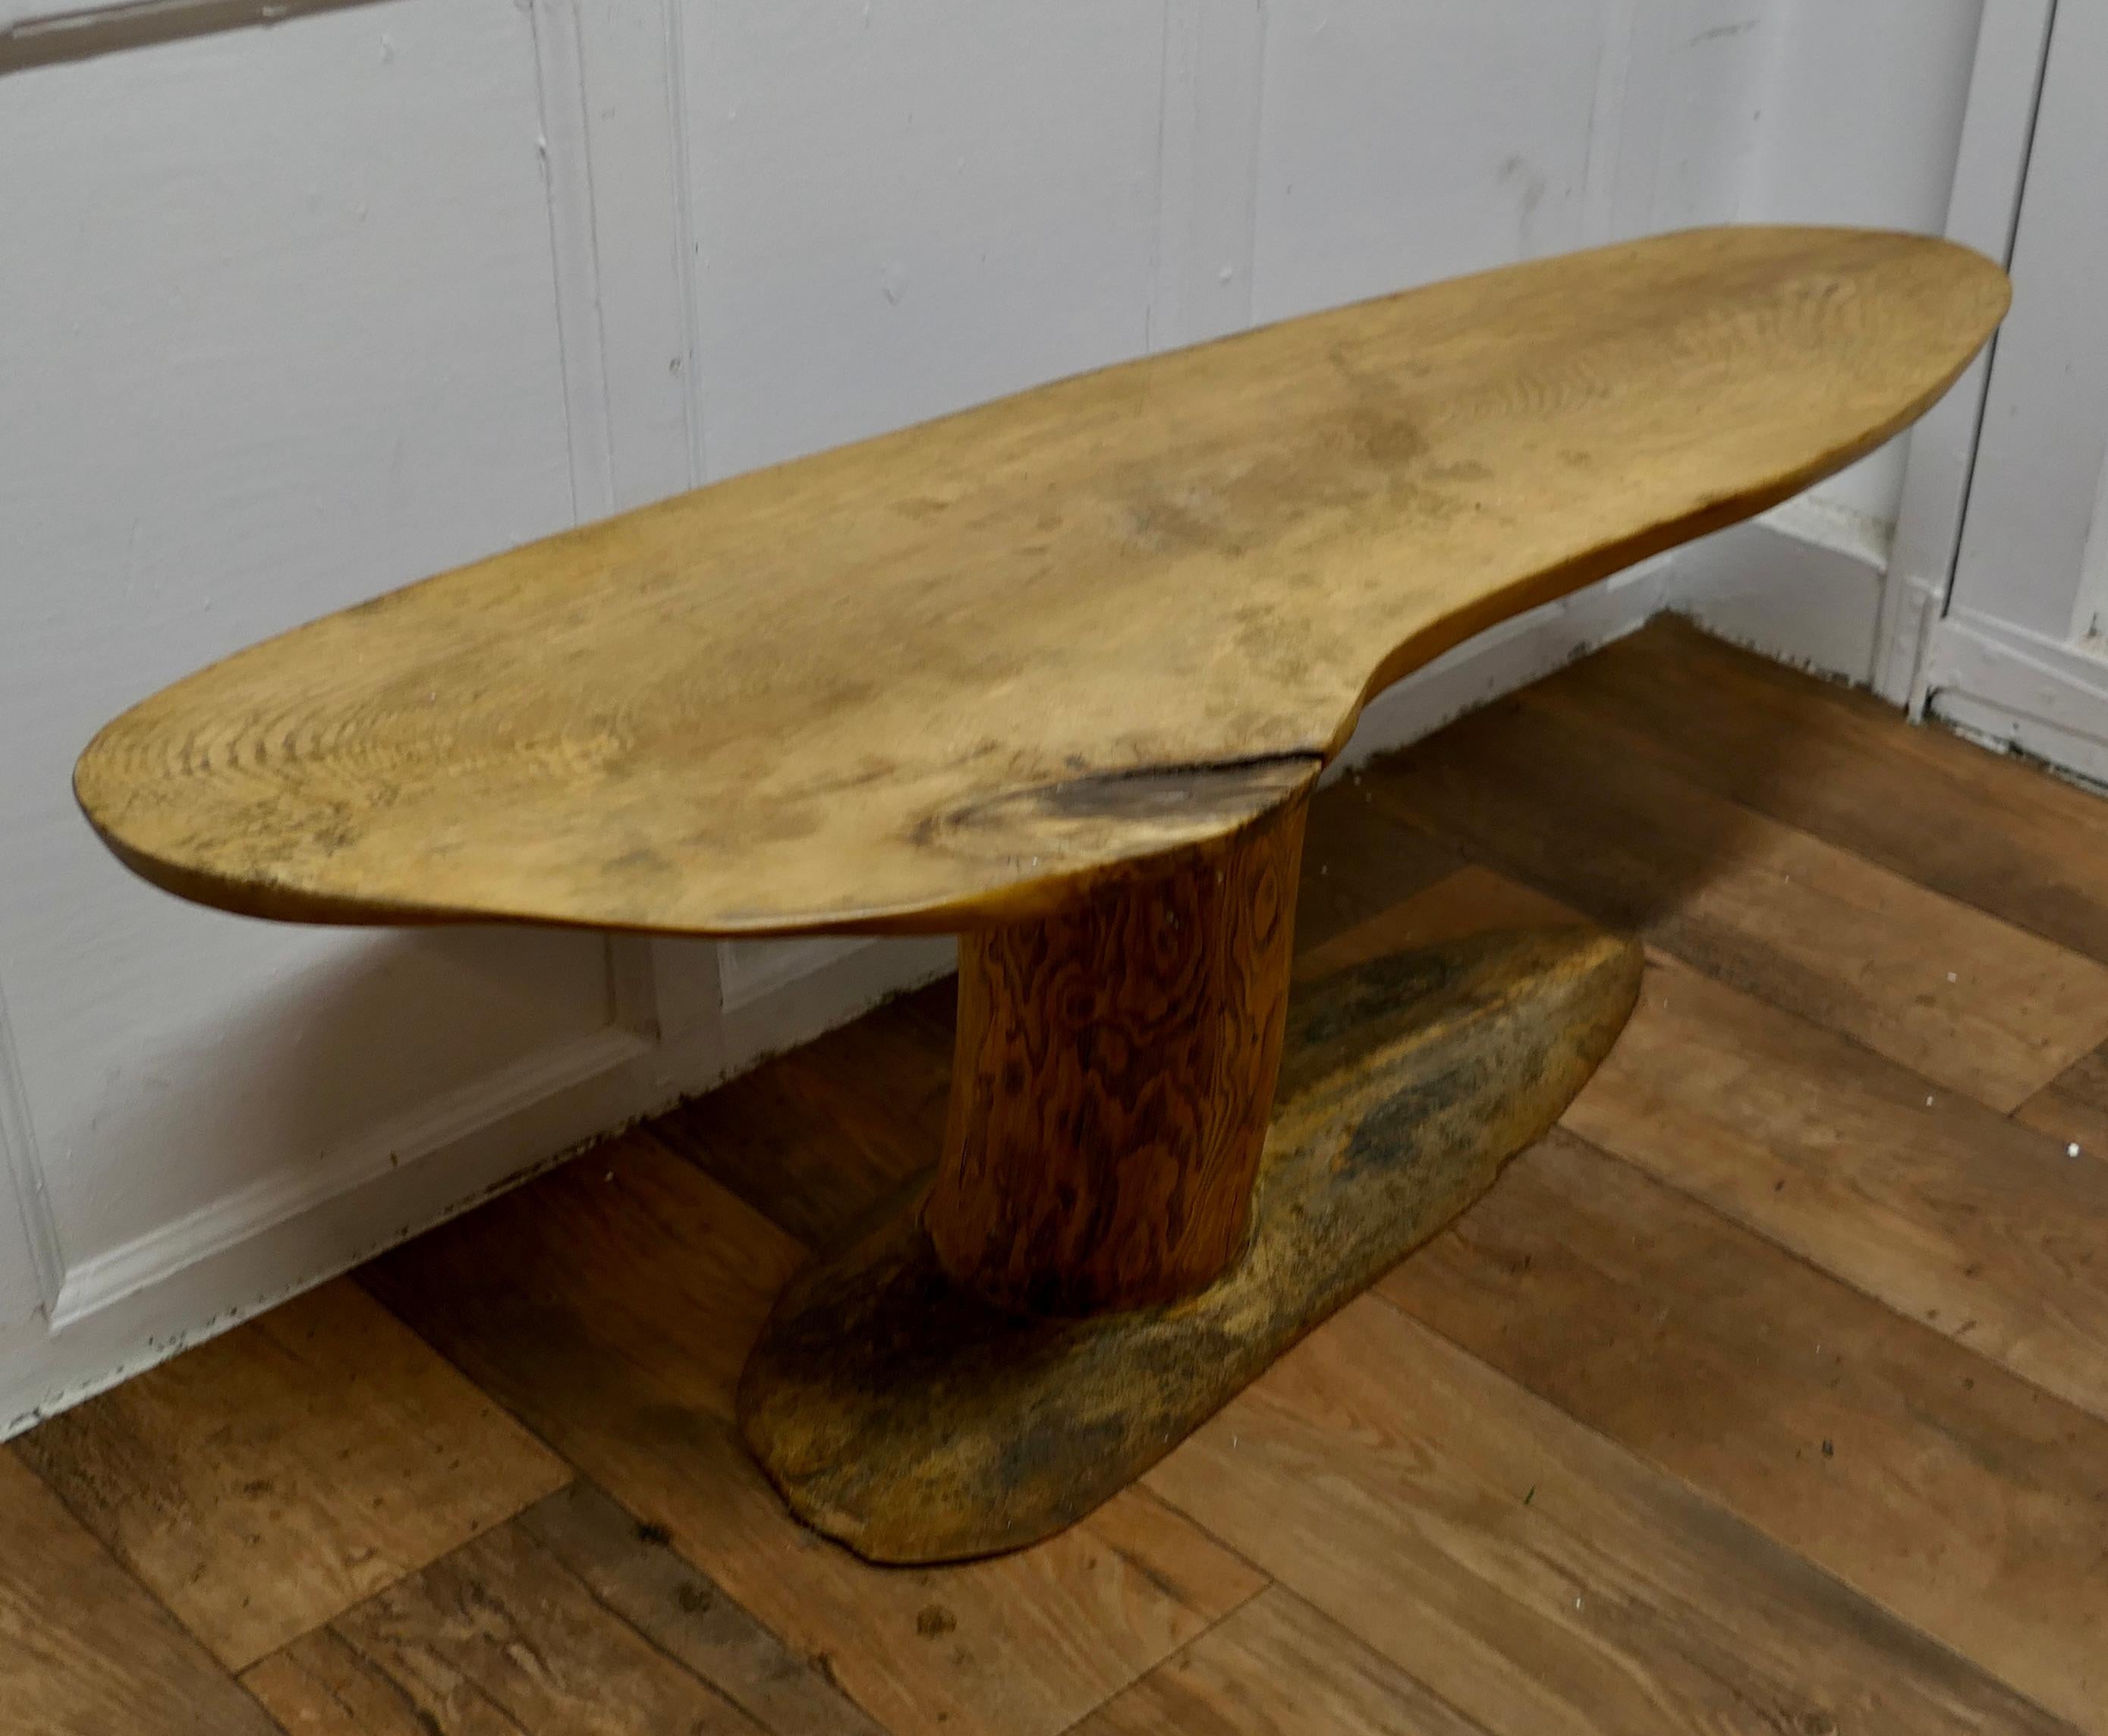 Vintage Handcrafted Freeform Live Edge Solid Plank Elm Coffee Table 

No other one like this, it has the appearance off a free form drift wood surf board. The table top is one plank and the pedestal support is a single trunk in Burr Elm, this makes